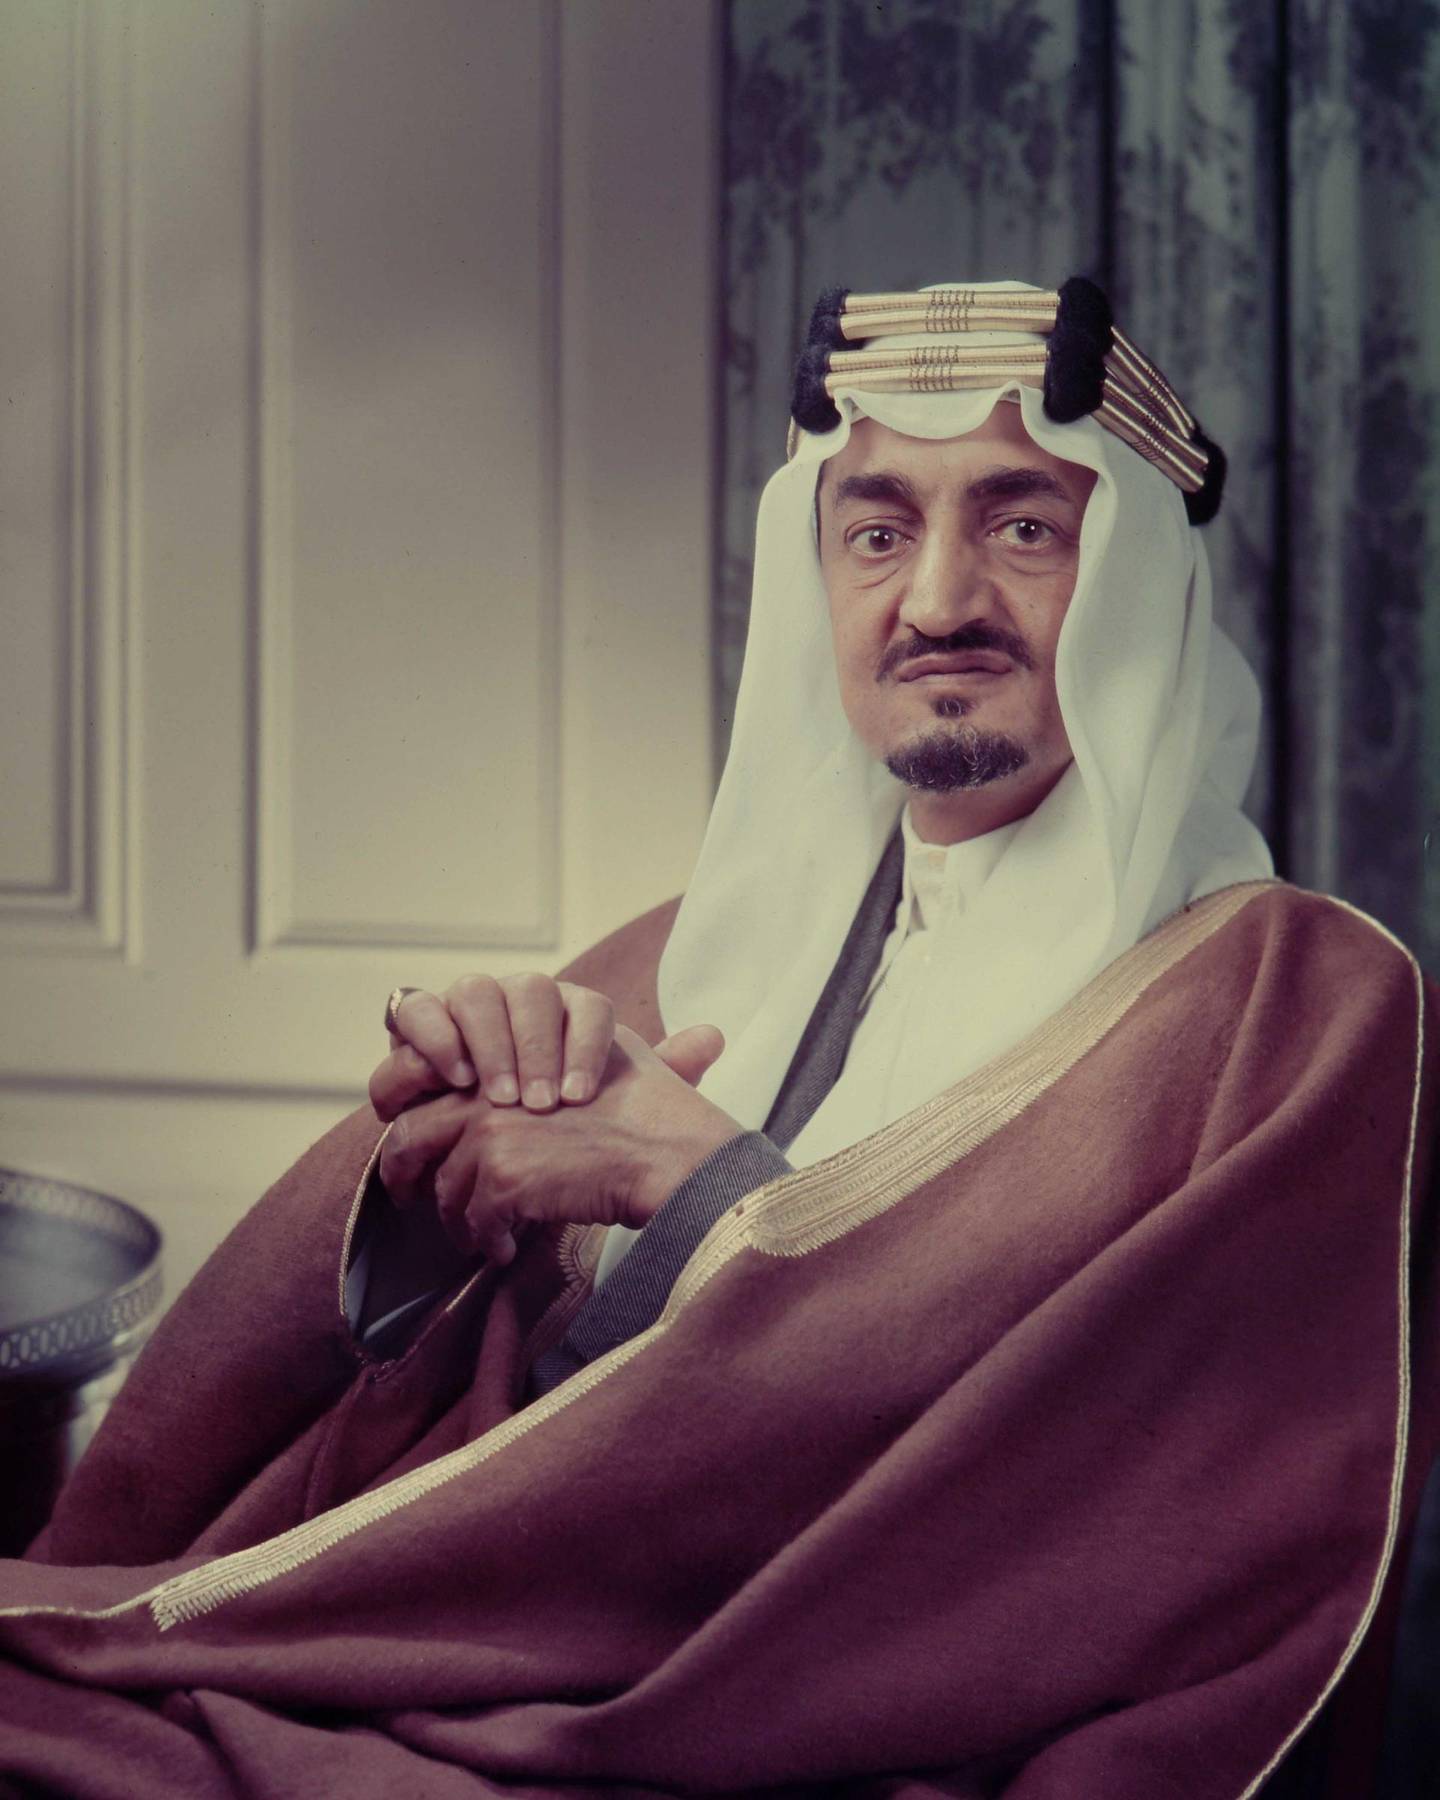 A portrait of the Saudi Arabian King Faisal ibn Abdul Aziz Al Saud (1906 - 1975) wearing a traditional headdress, United States, mid-20th century. (Photo by Bachrach/Getty Images)